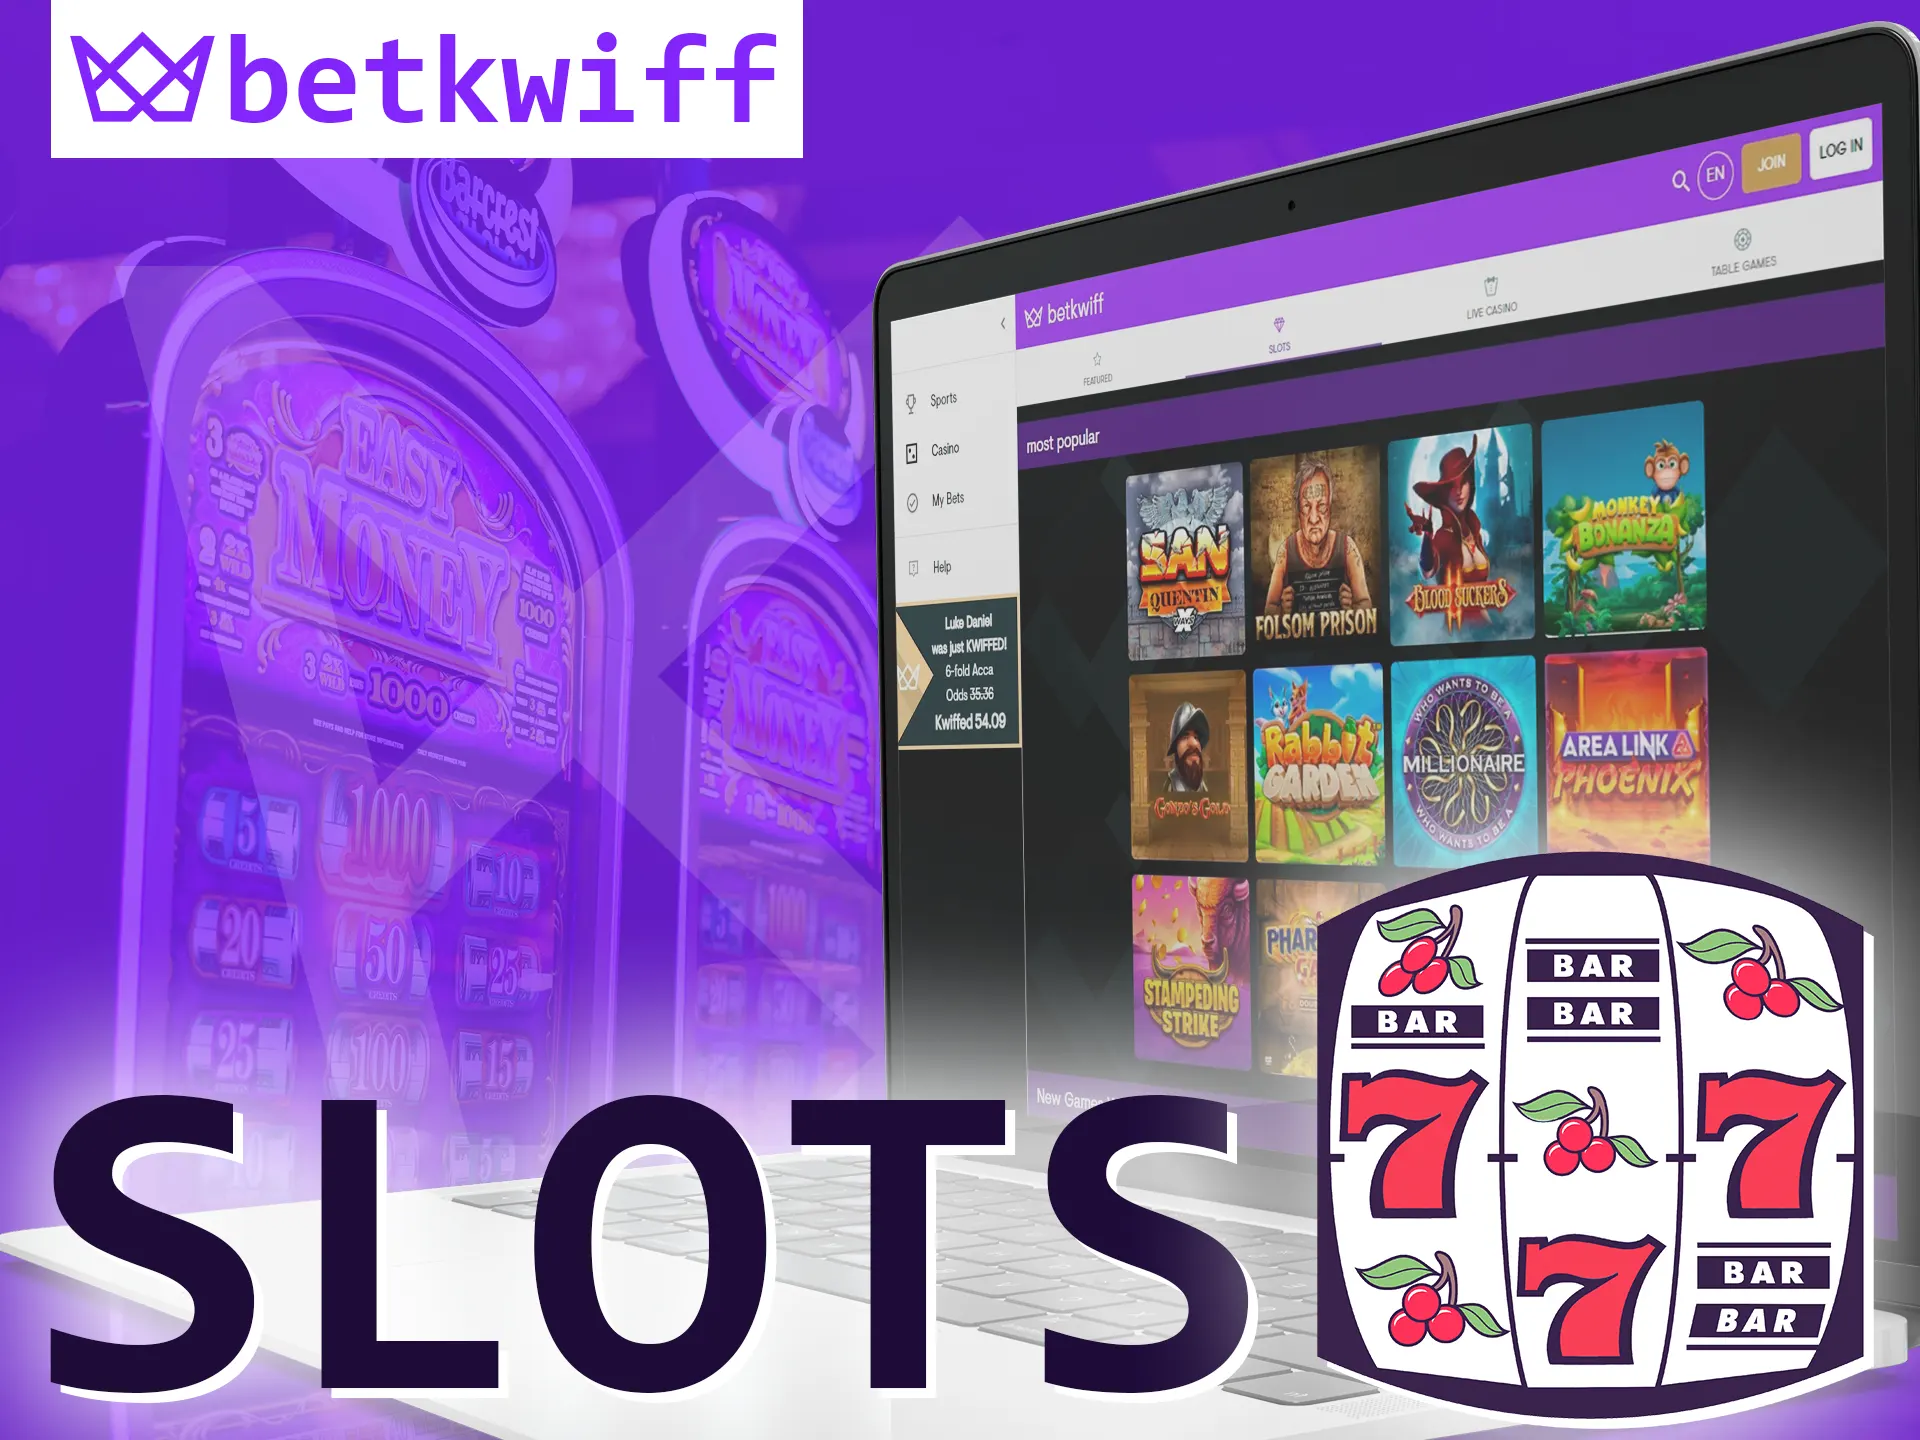 With Betkwiff, play slots.